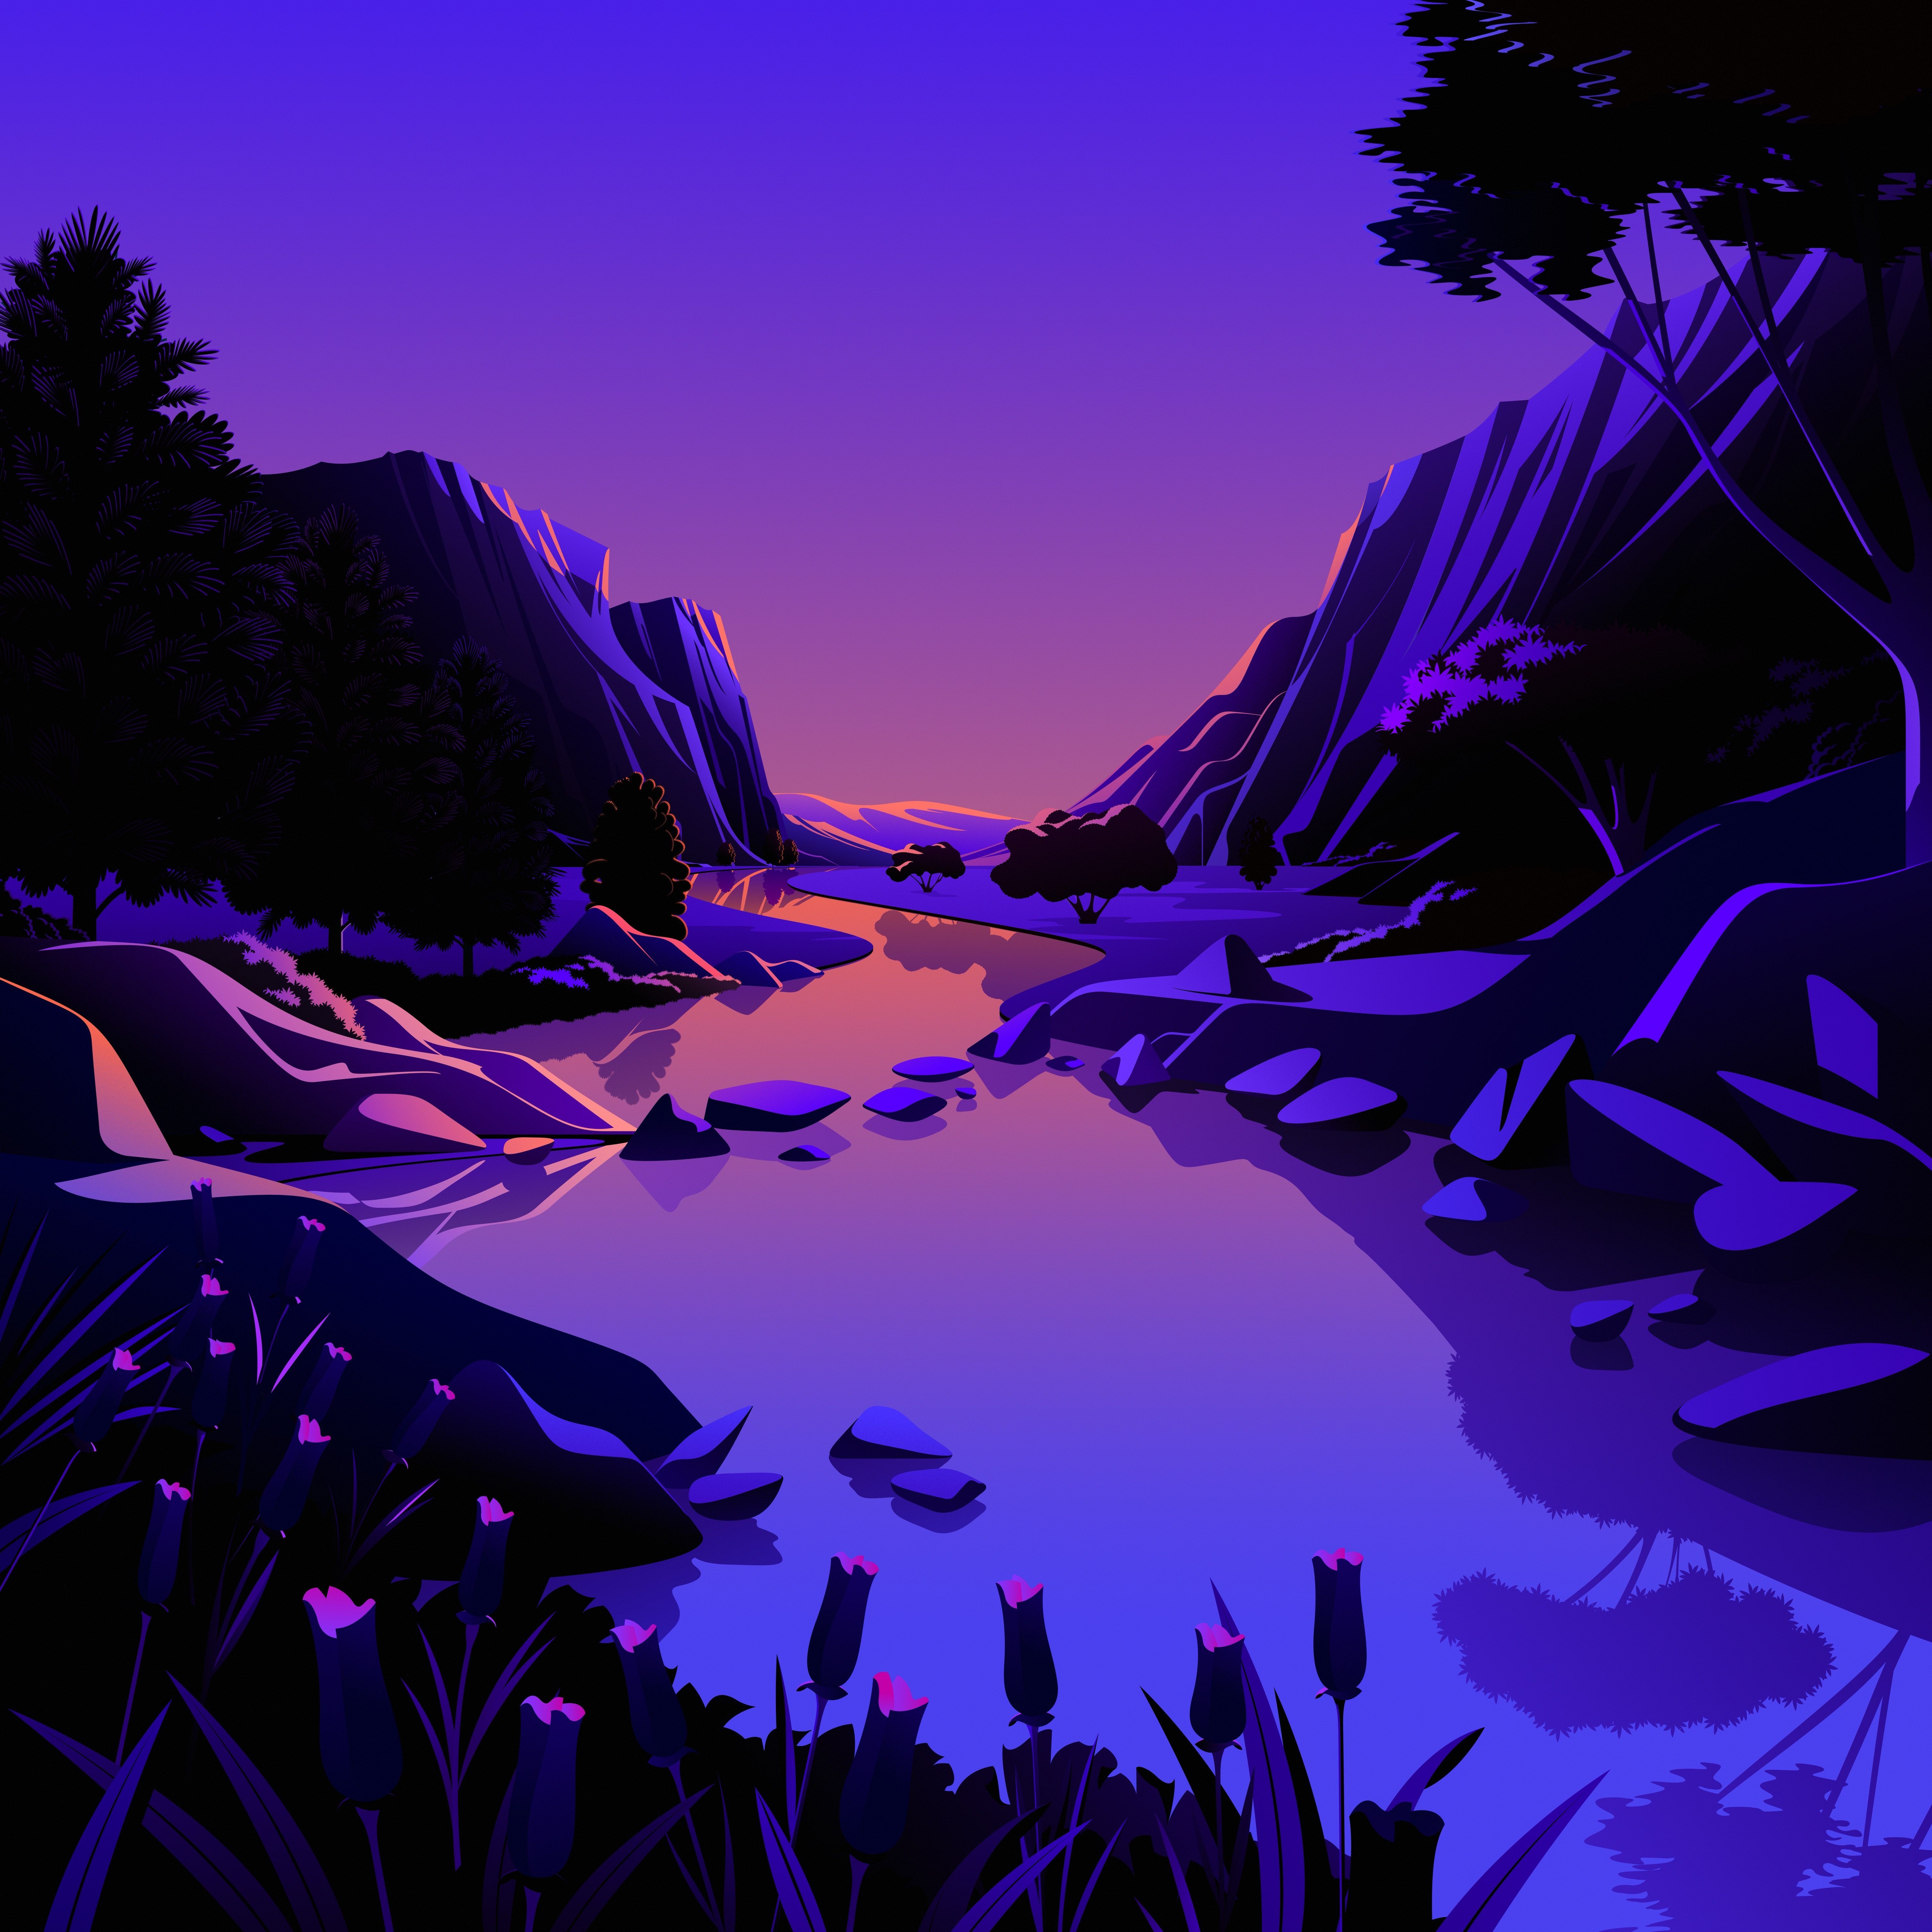 macOS Big Sur 11.0.1 includes even more new wallpaper, download them here